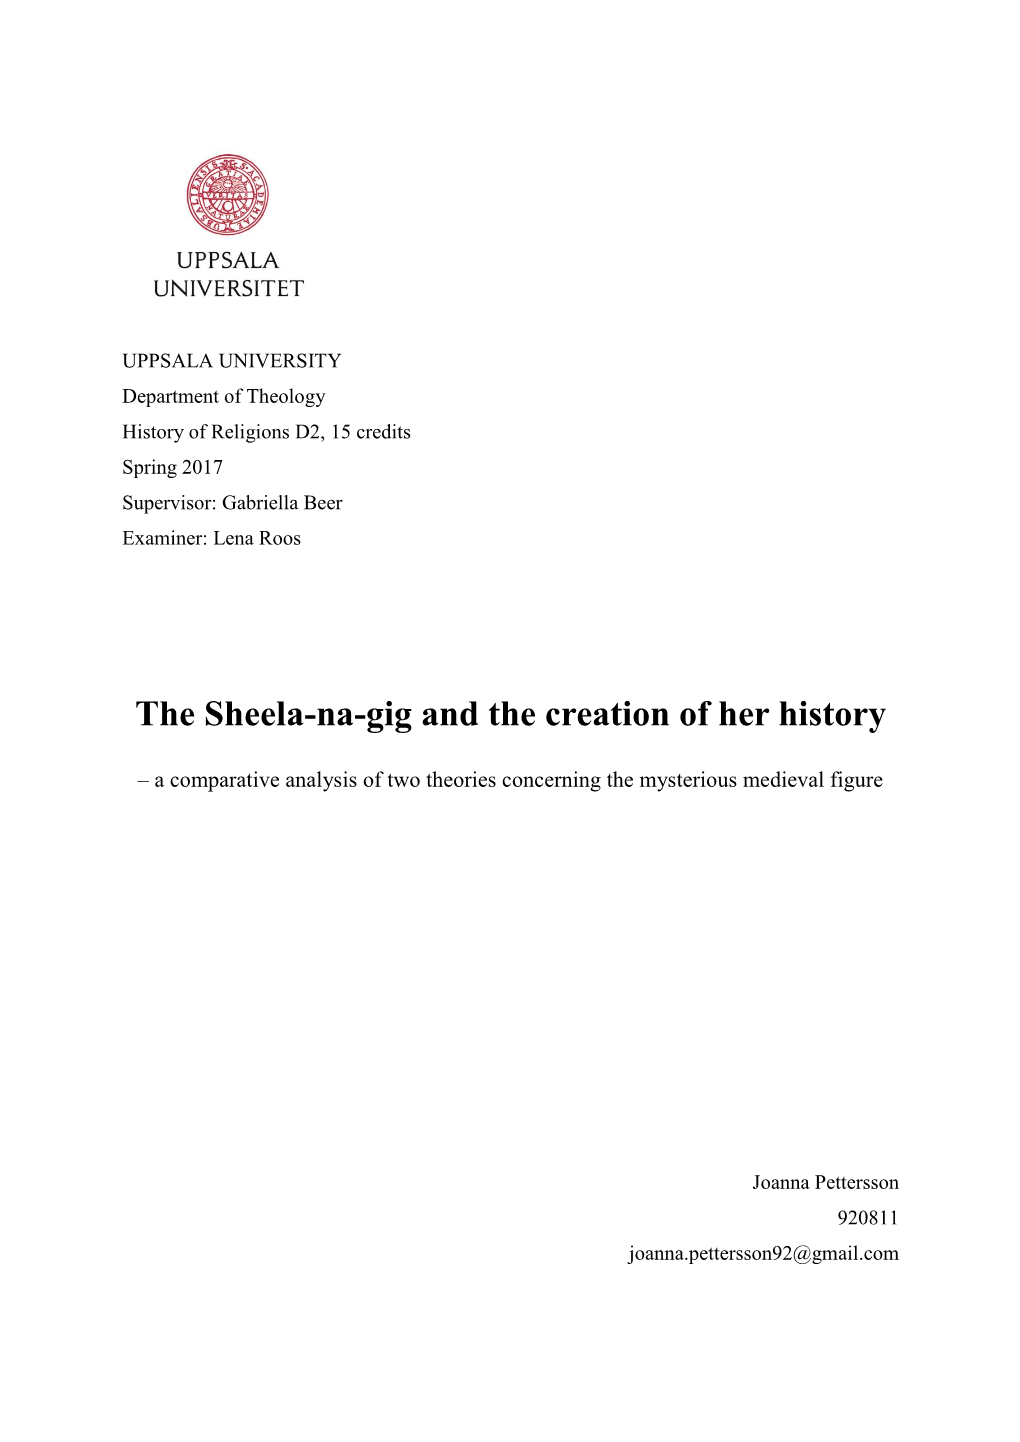 The Sheela-Na-Gig and the Creation of Her History